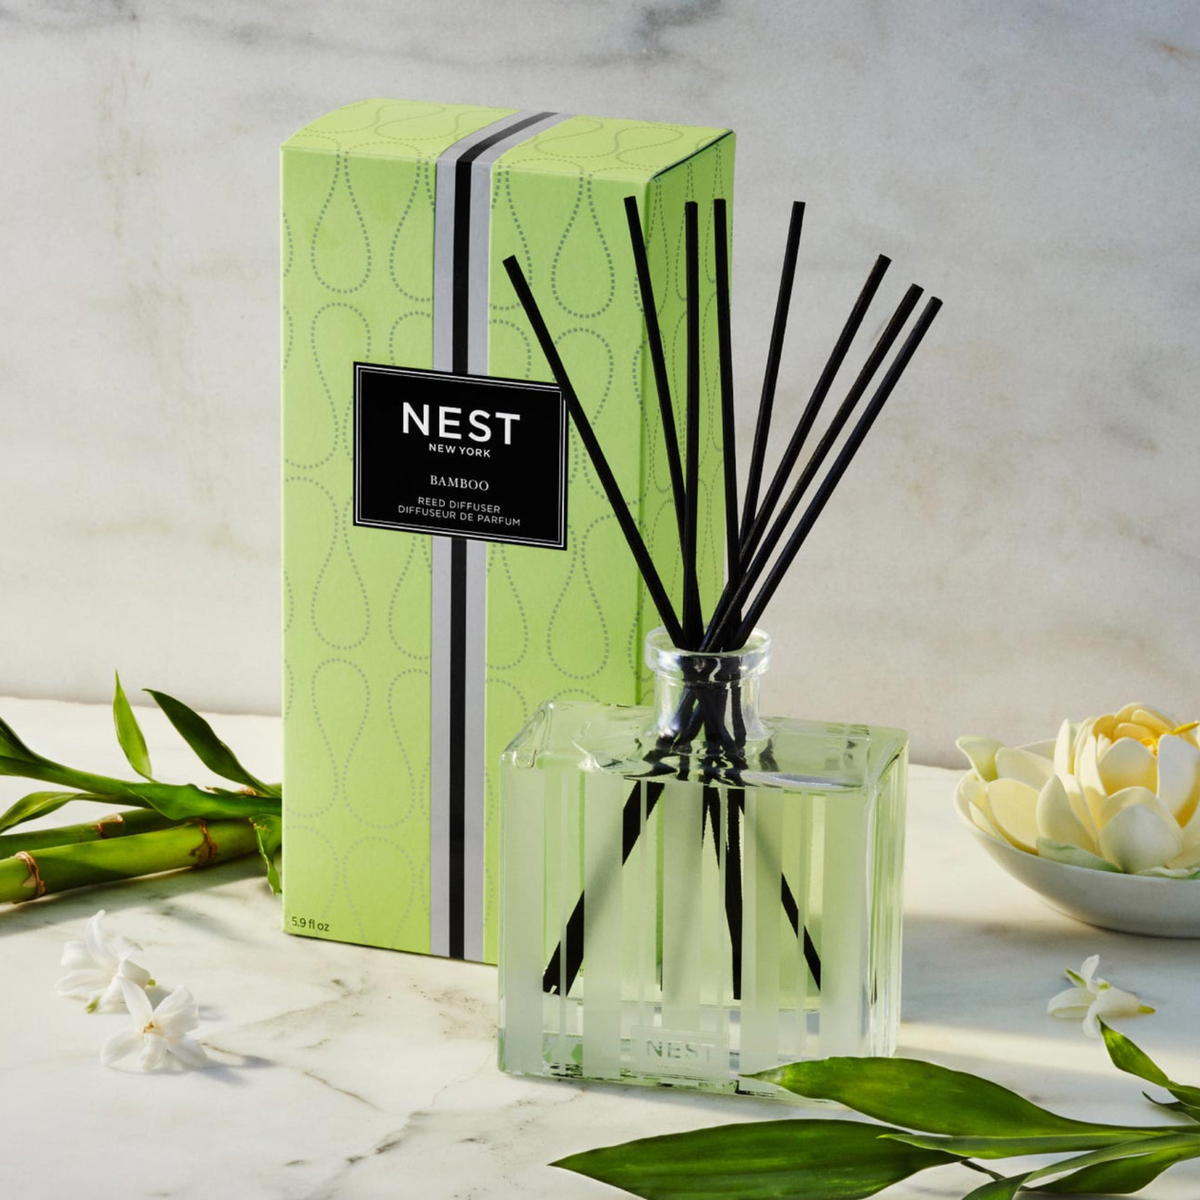 Nest New York’s Bamboo Reed Diffuser Lifestyle With Box